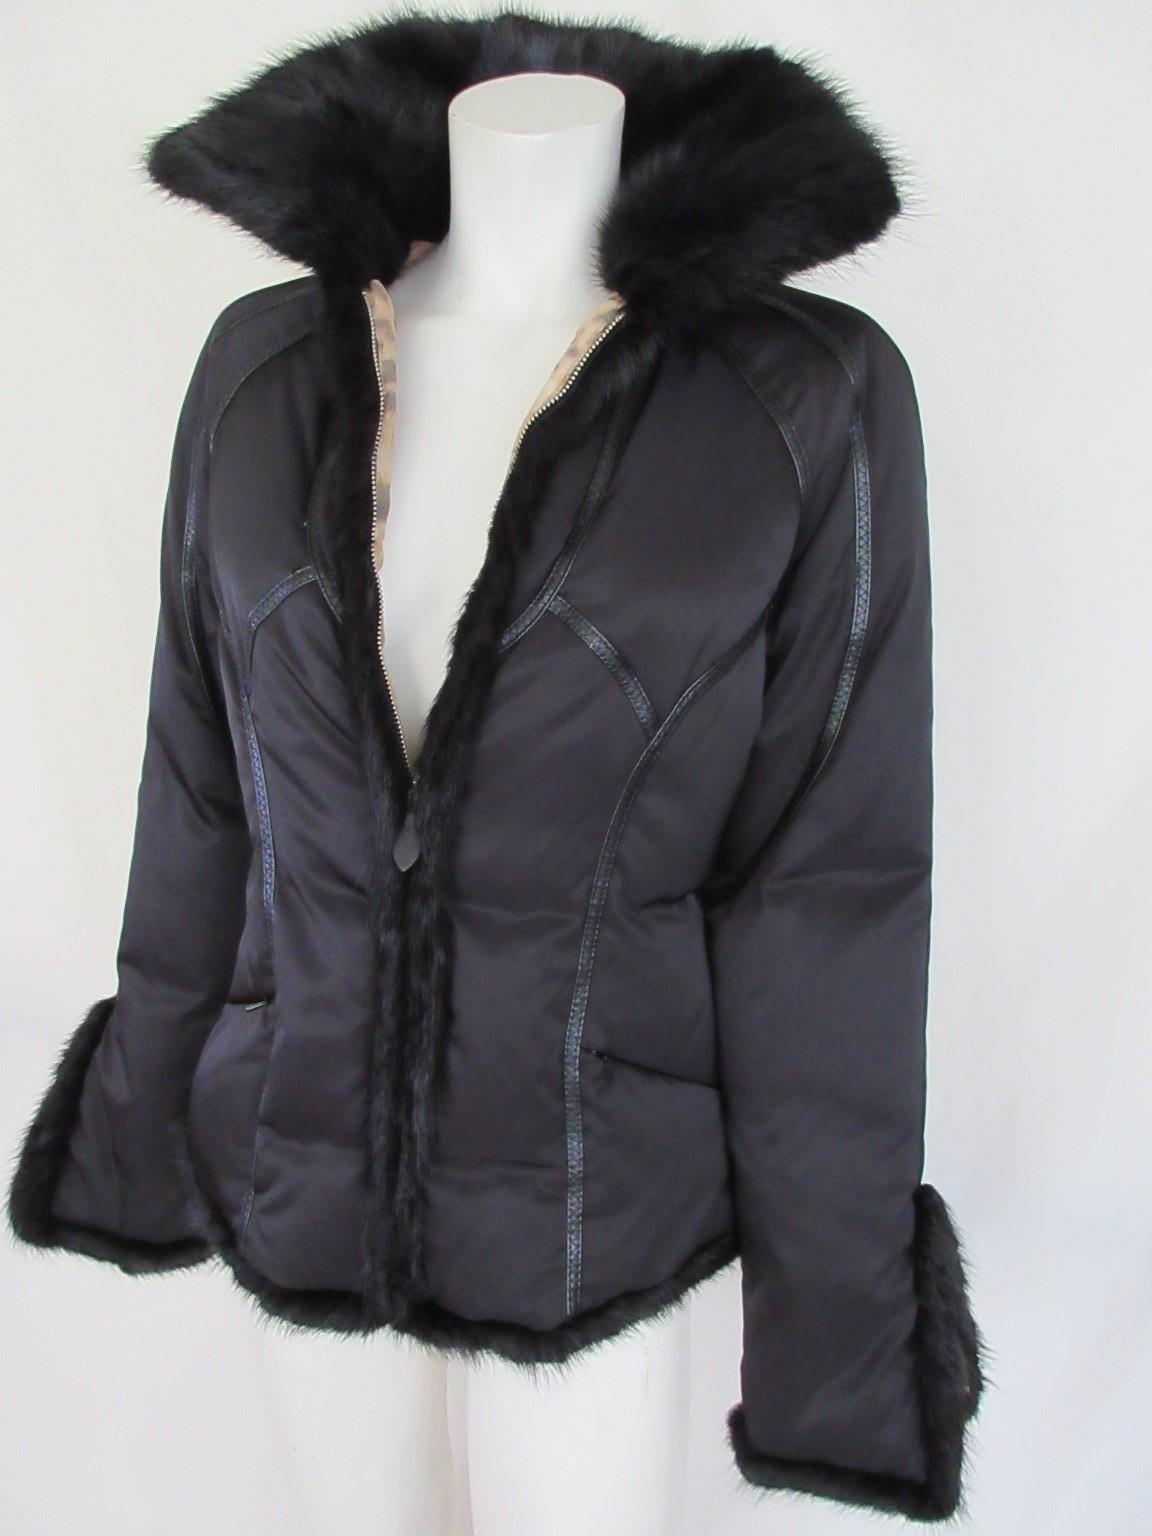 We offer more exclusive items, view our frontstore

This down filled jacket has a faux leopard print lining, 2 zipper pockets, zipper closing at the front and zipper closing at the sleeves.
The collar and the trim is black mink, not